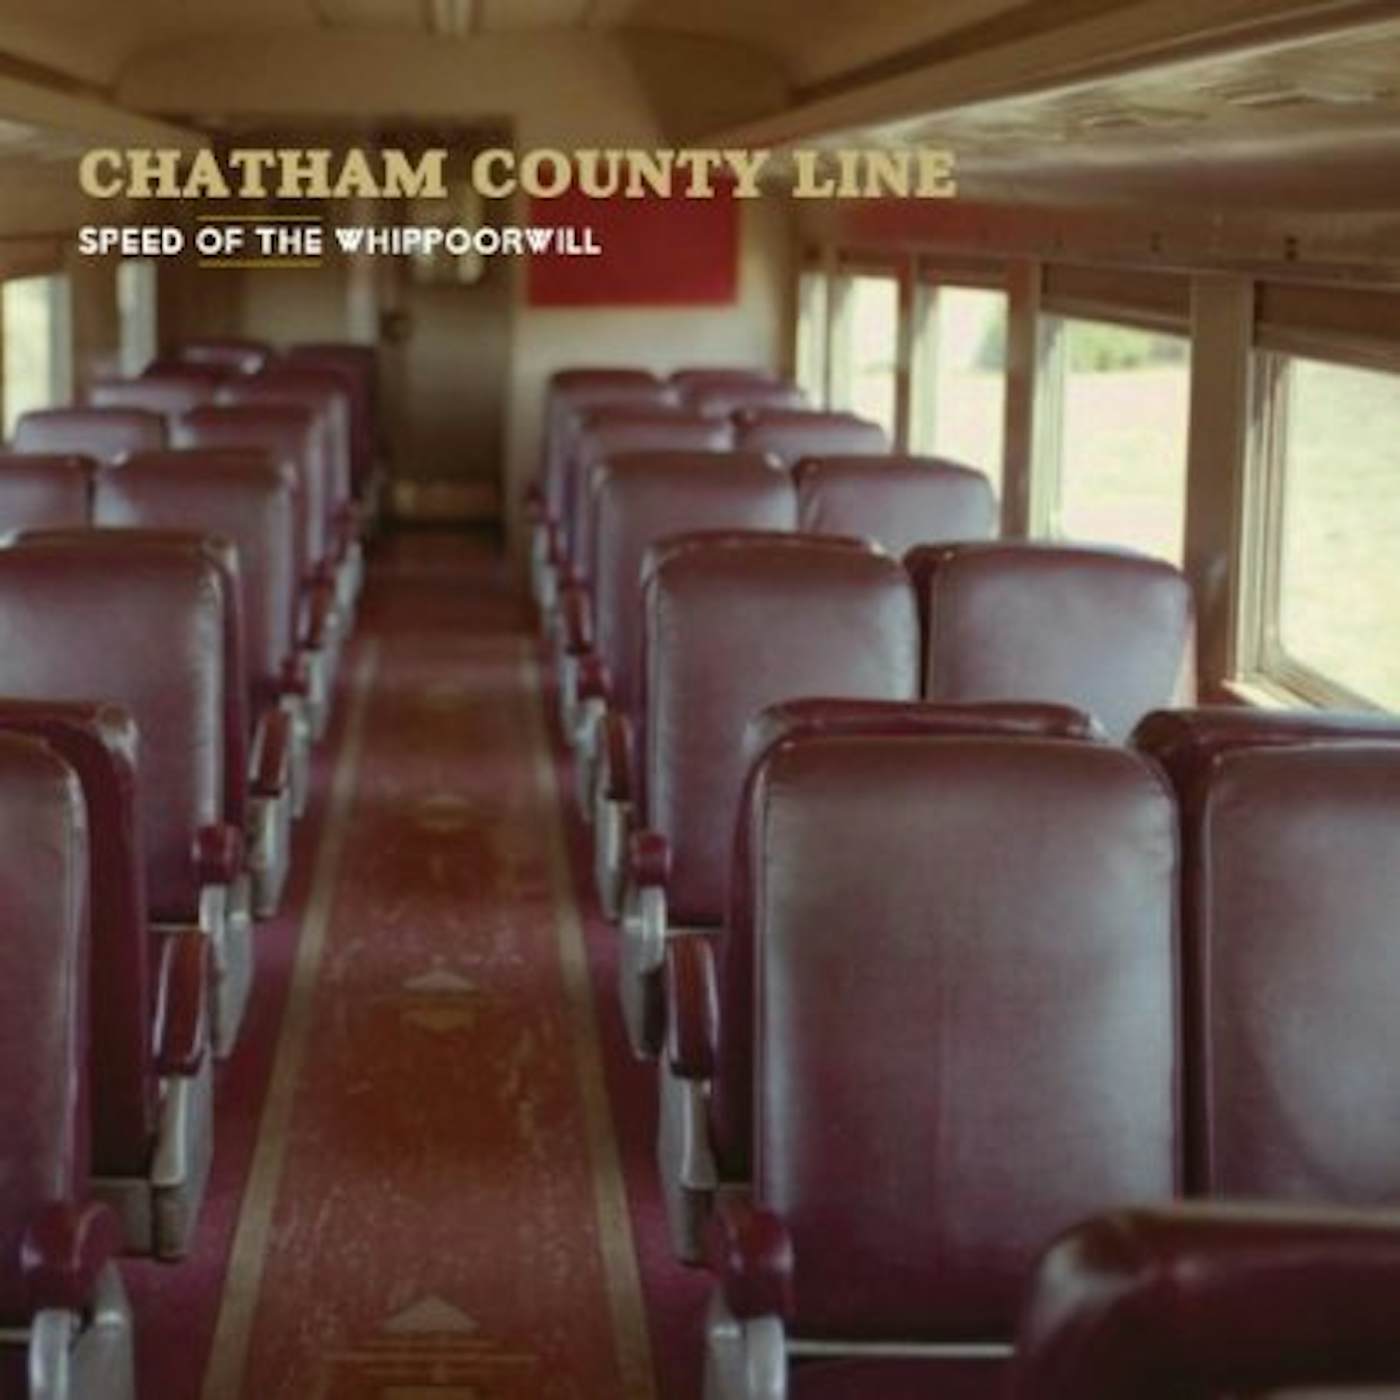 Chatham County Line Speed of the Whippoorwill Vinyl Record